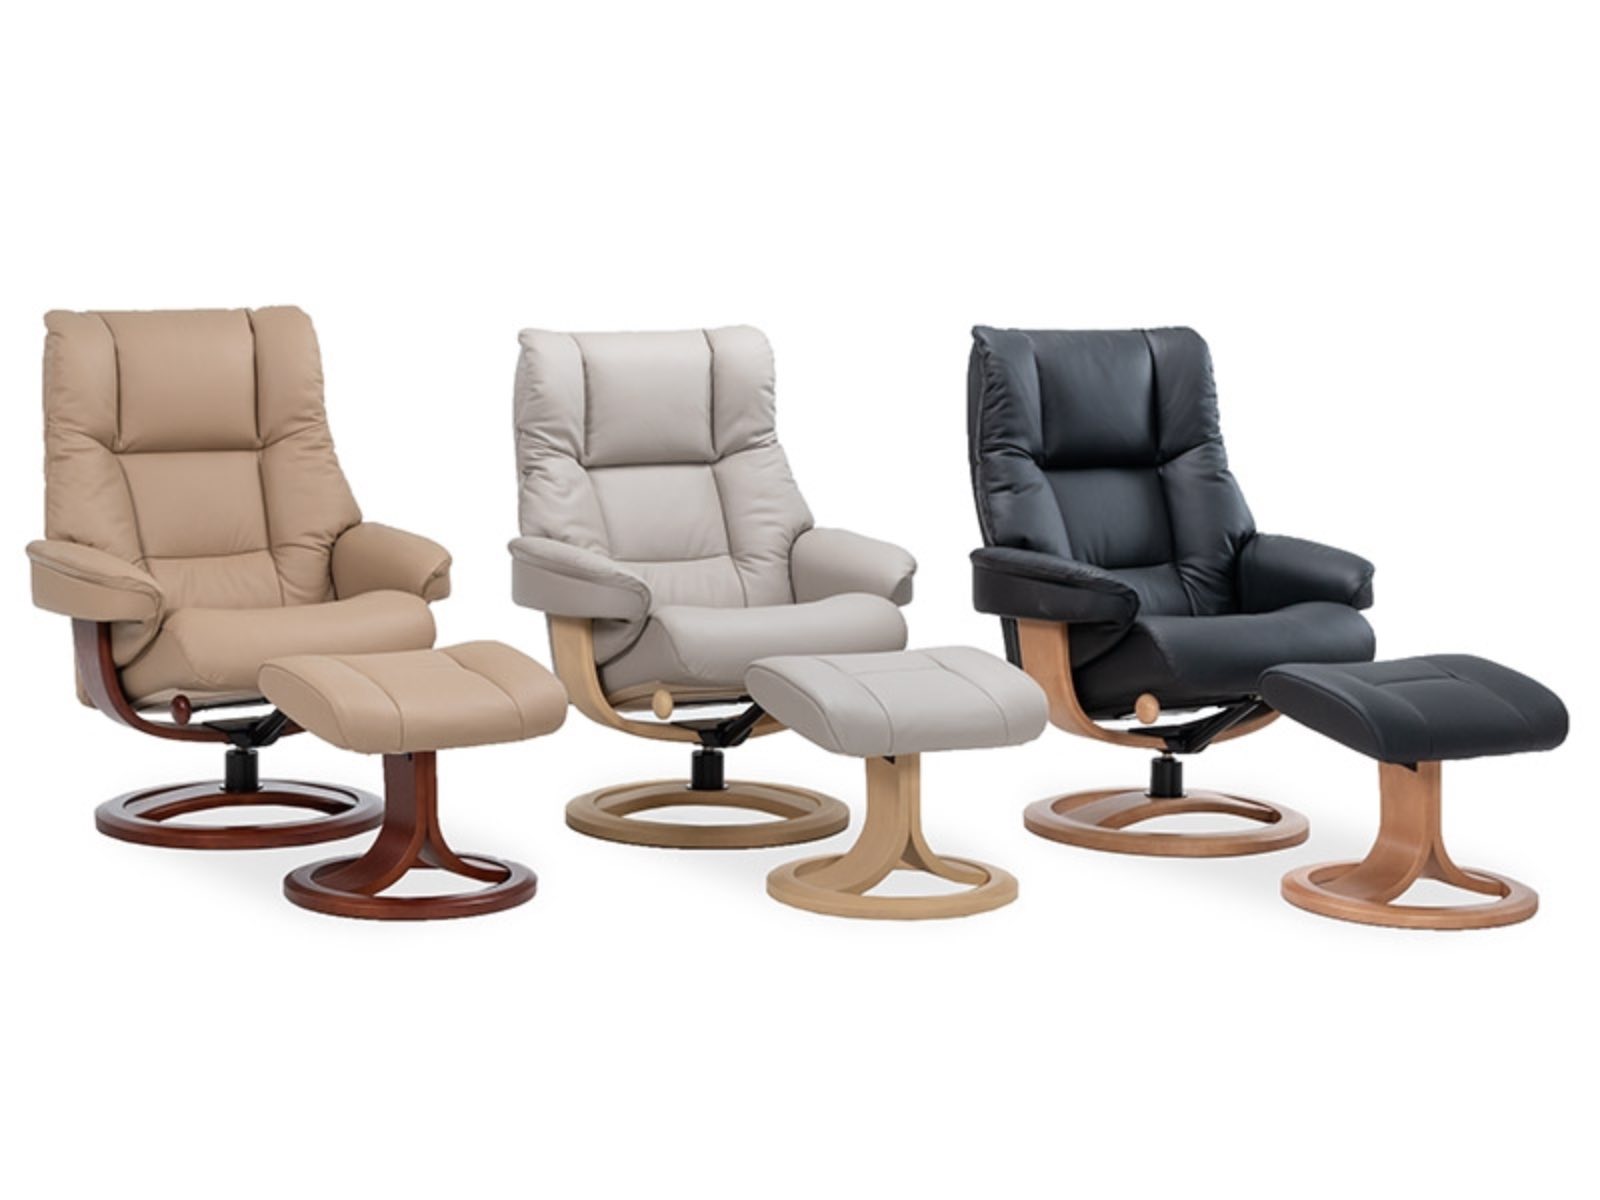 Leather Recliner Chairs Nordic 60, Nordic Leather Recliners